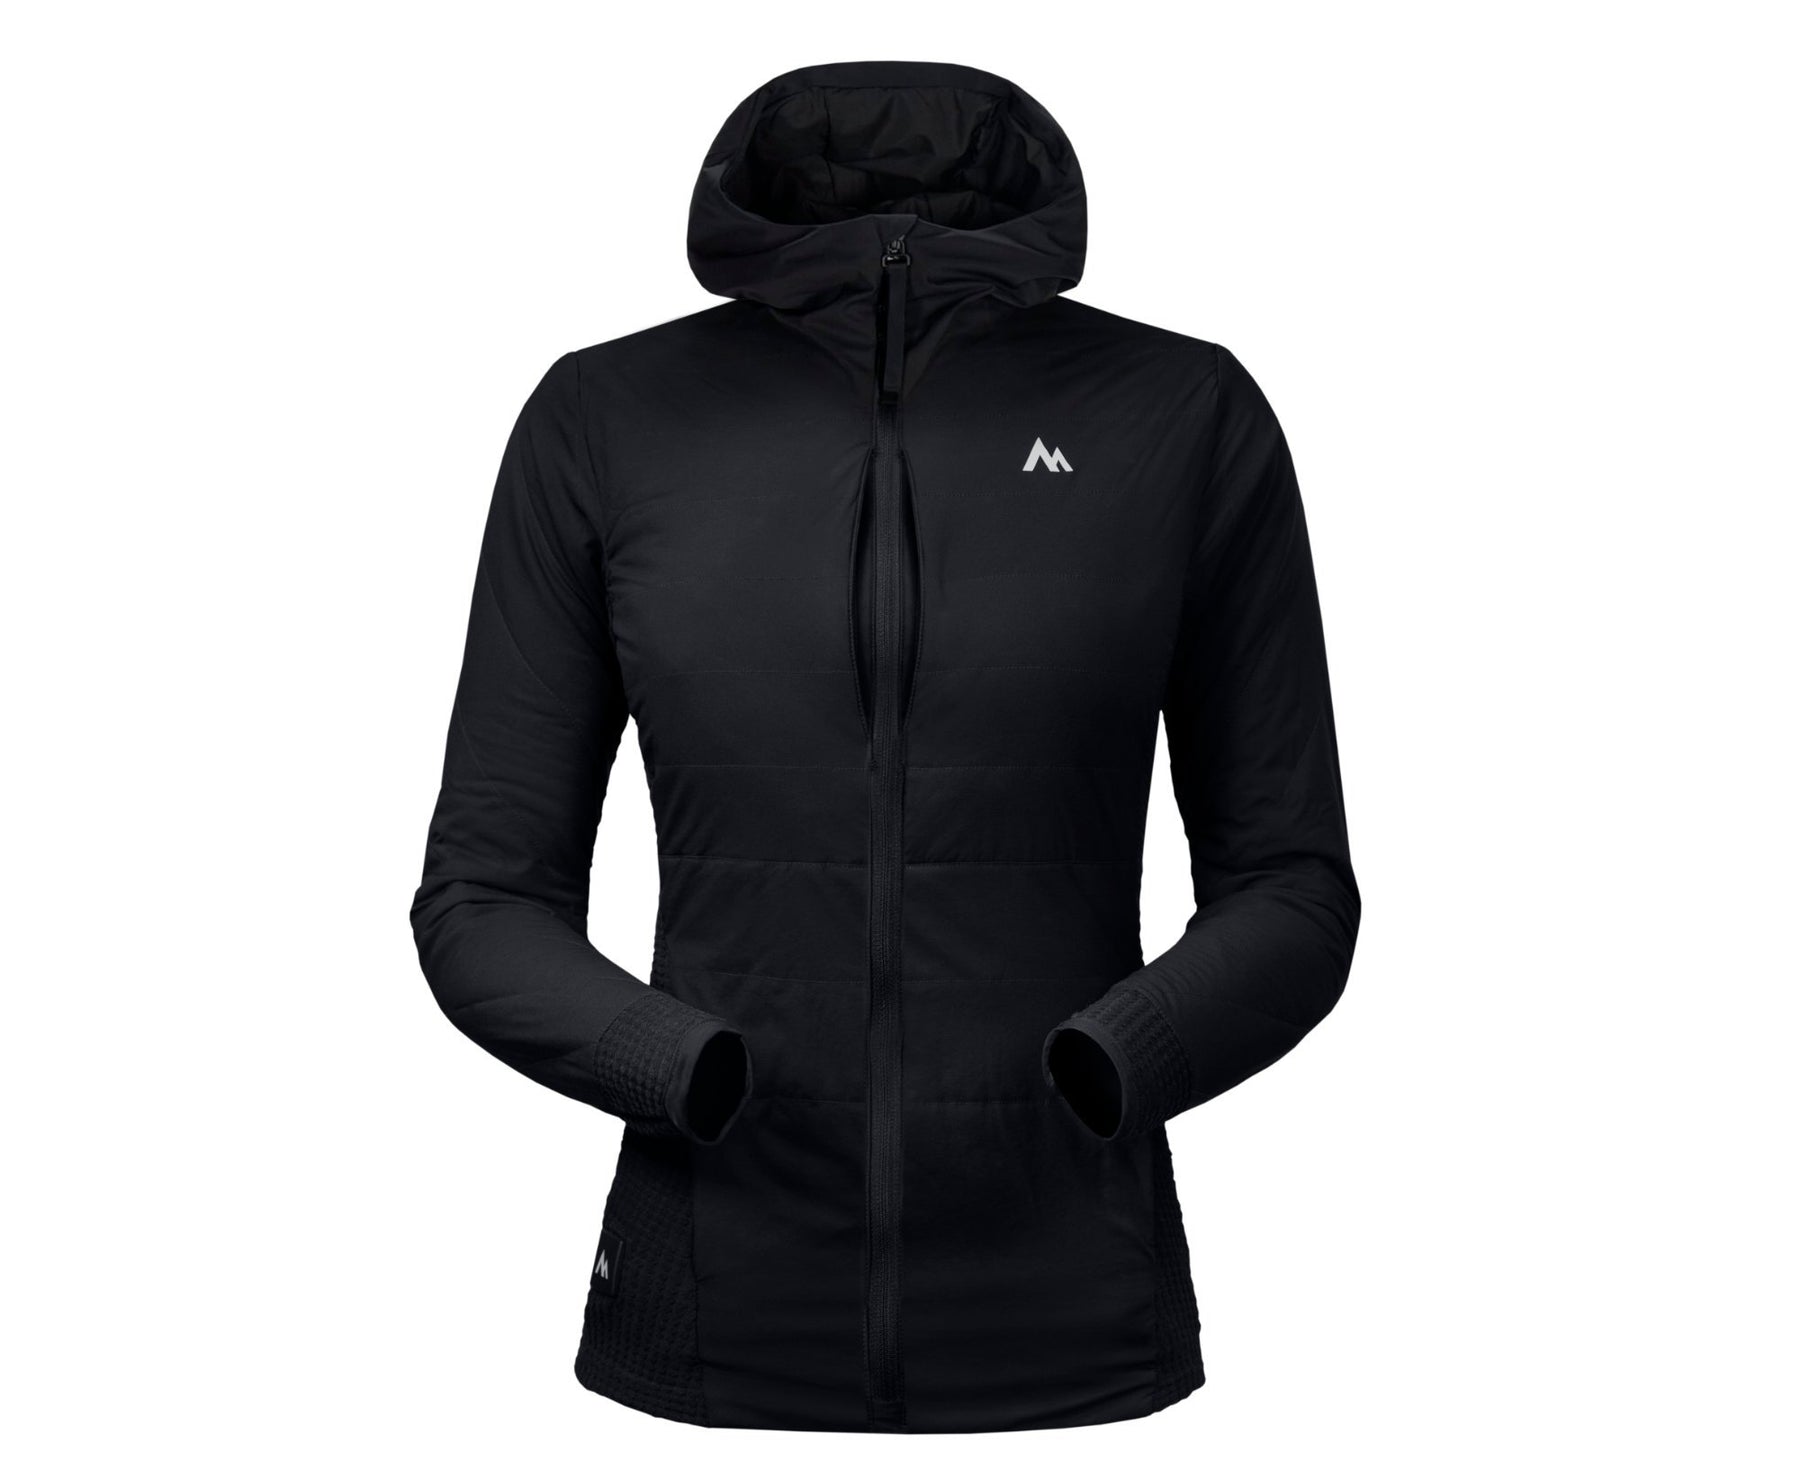 DelSur | The Active 4-way Stretch MidLayer